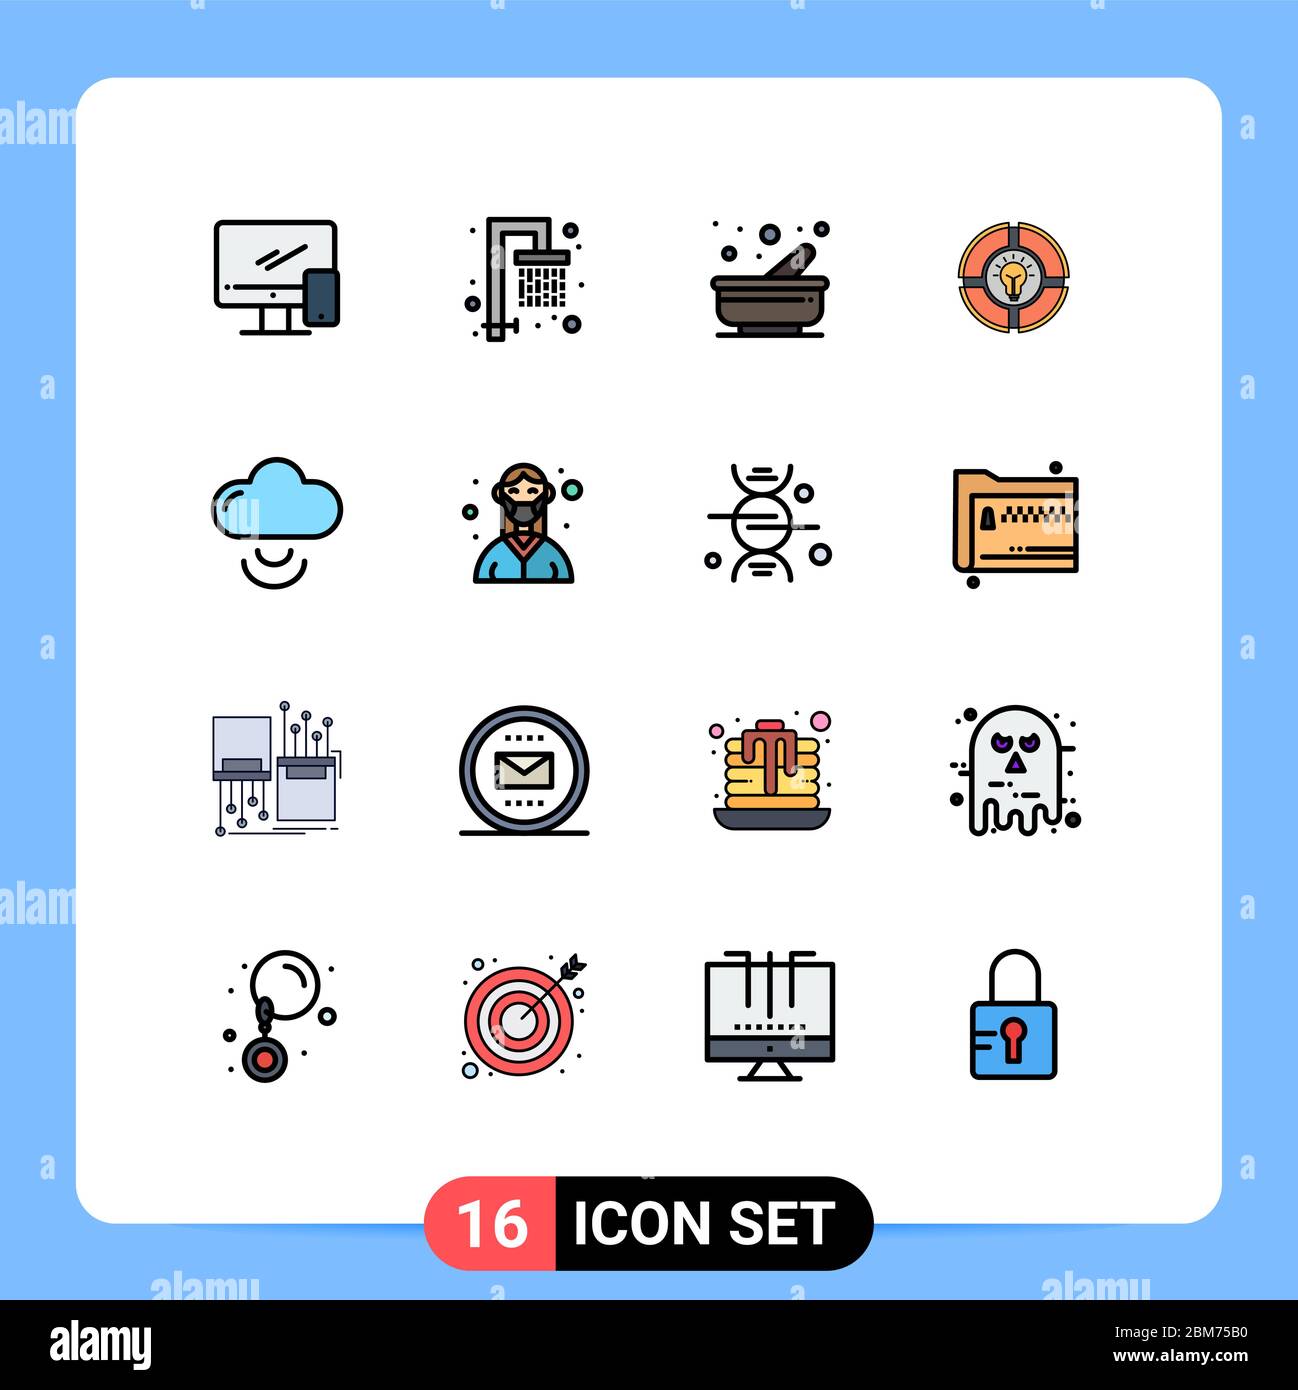 Set of 16 Modern UI Icons Symbols Signs for cloud, light, cooking, chat, bulb Editable Creative Vector Design Elements Stock Vector